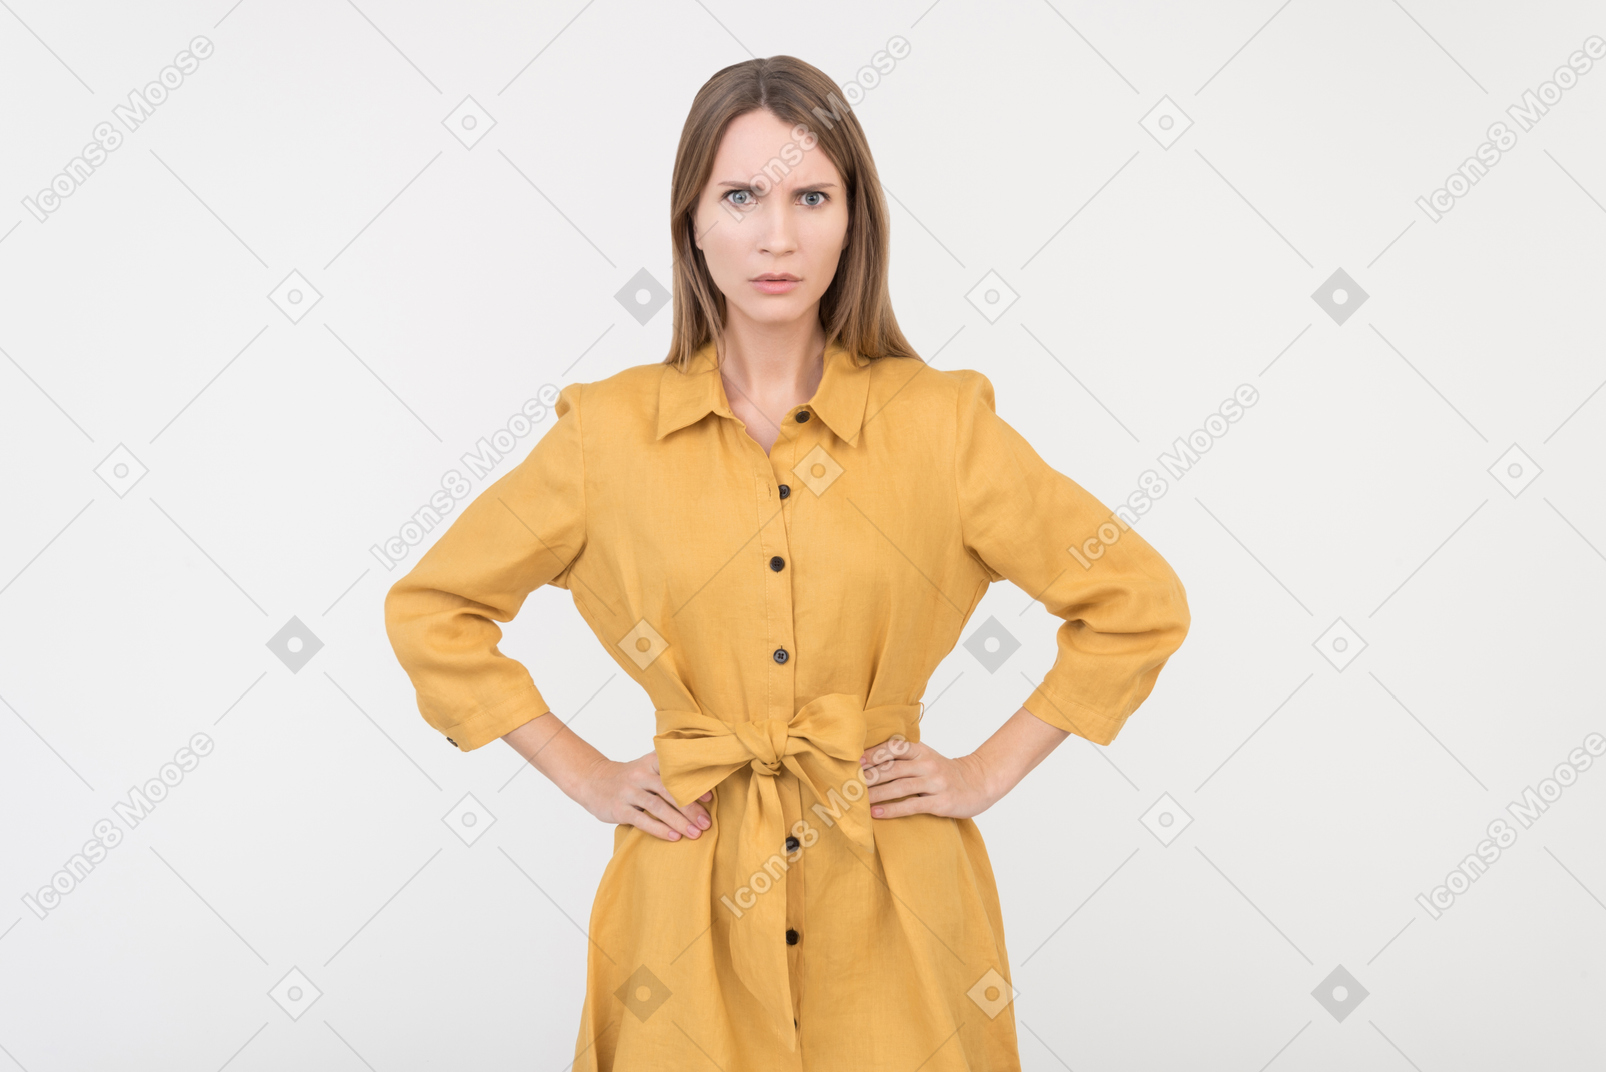 Mad young woman standing her hands on hips